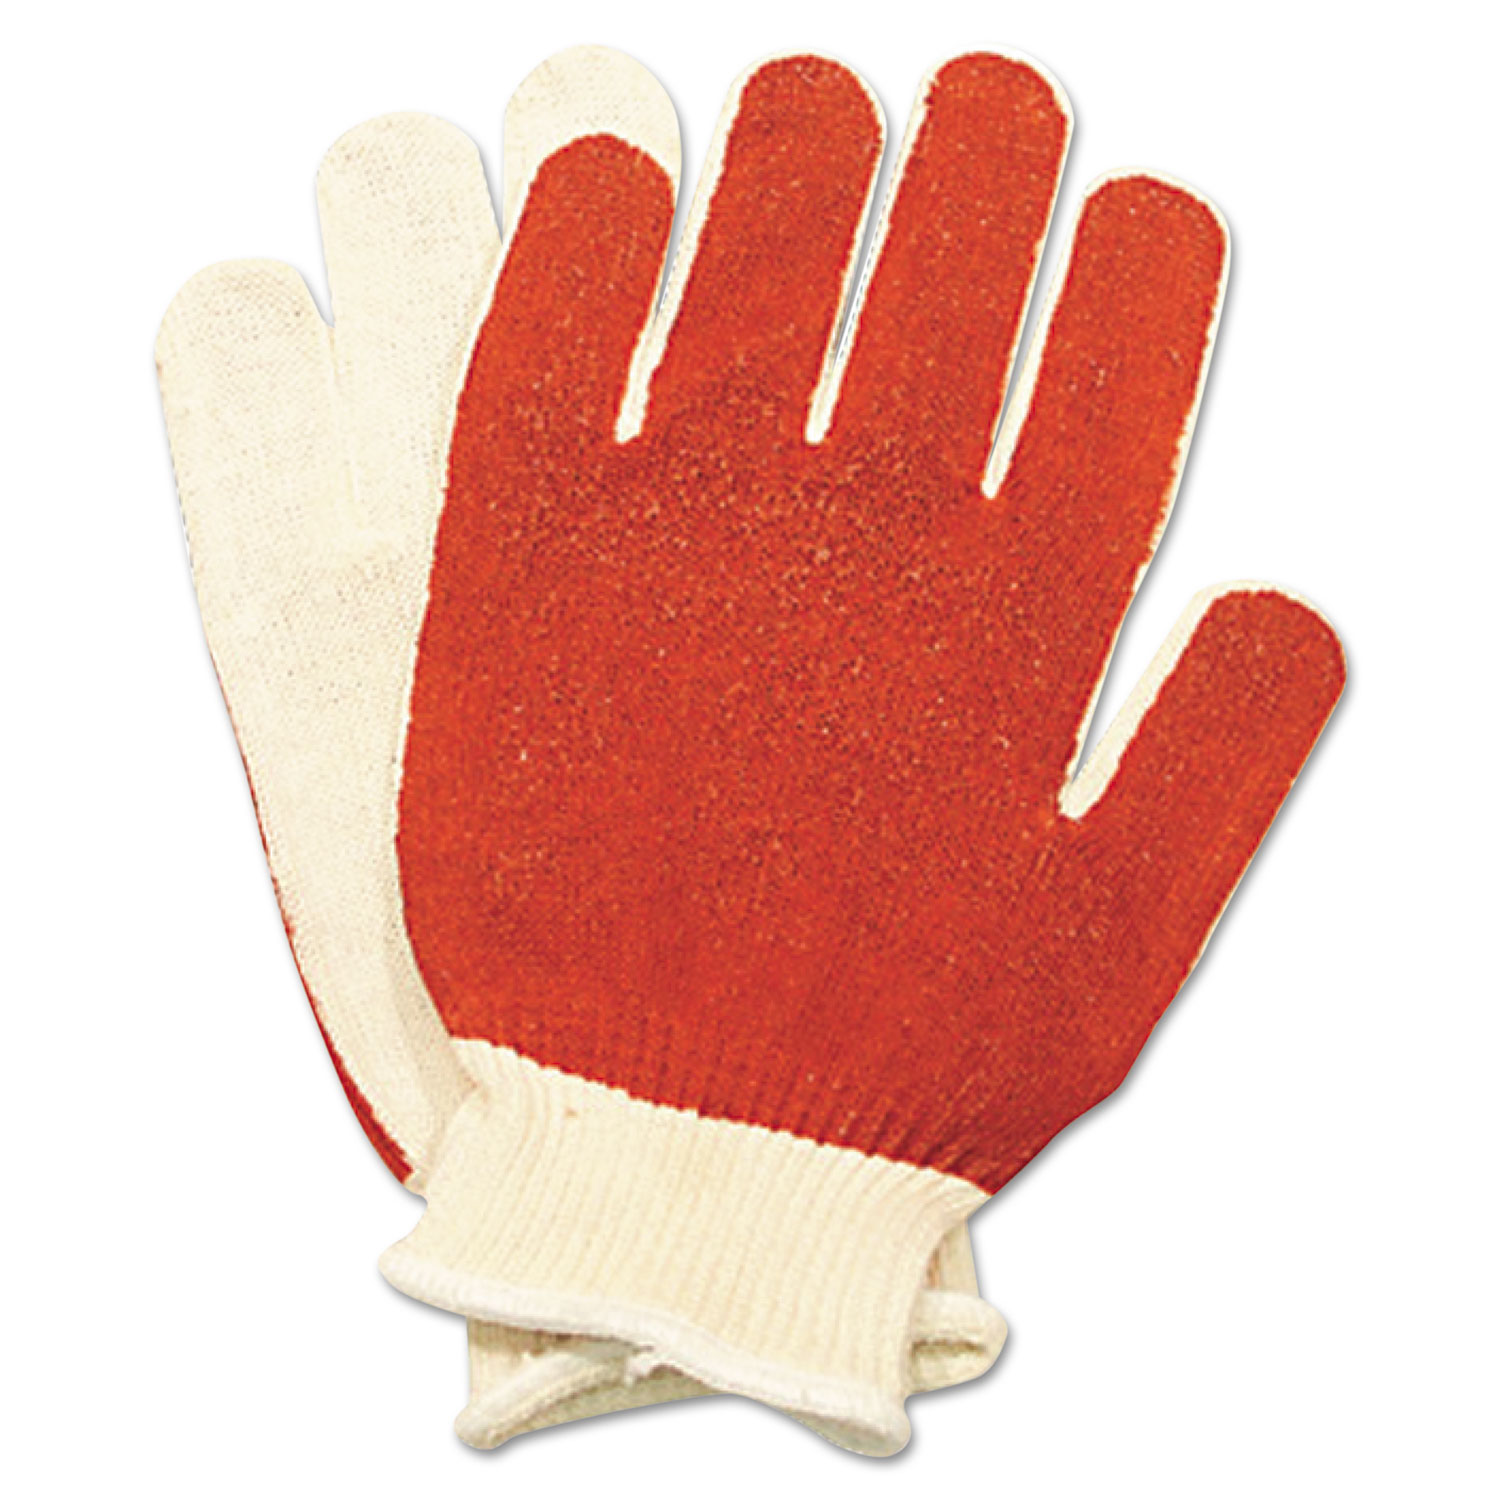  North Safety 81/1162M Smitty Nitrile Palm Coated Gloves, White/Red, Medium, 12 Pairs (NSP811162M) 